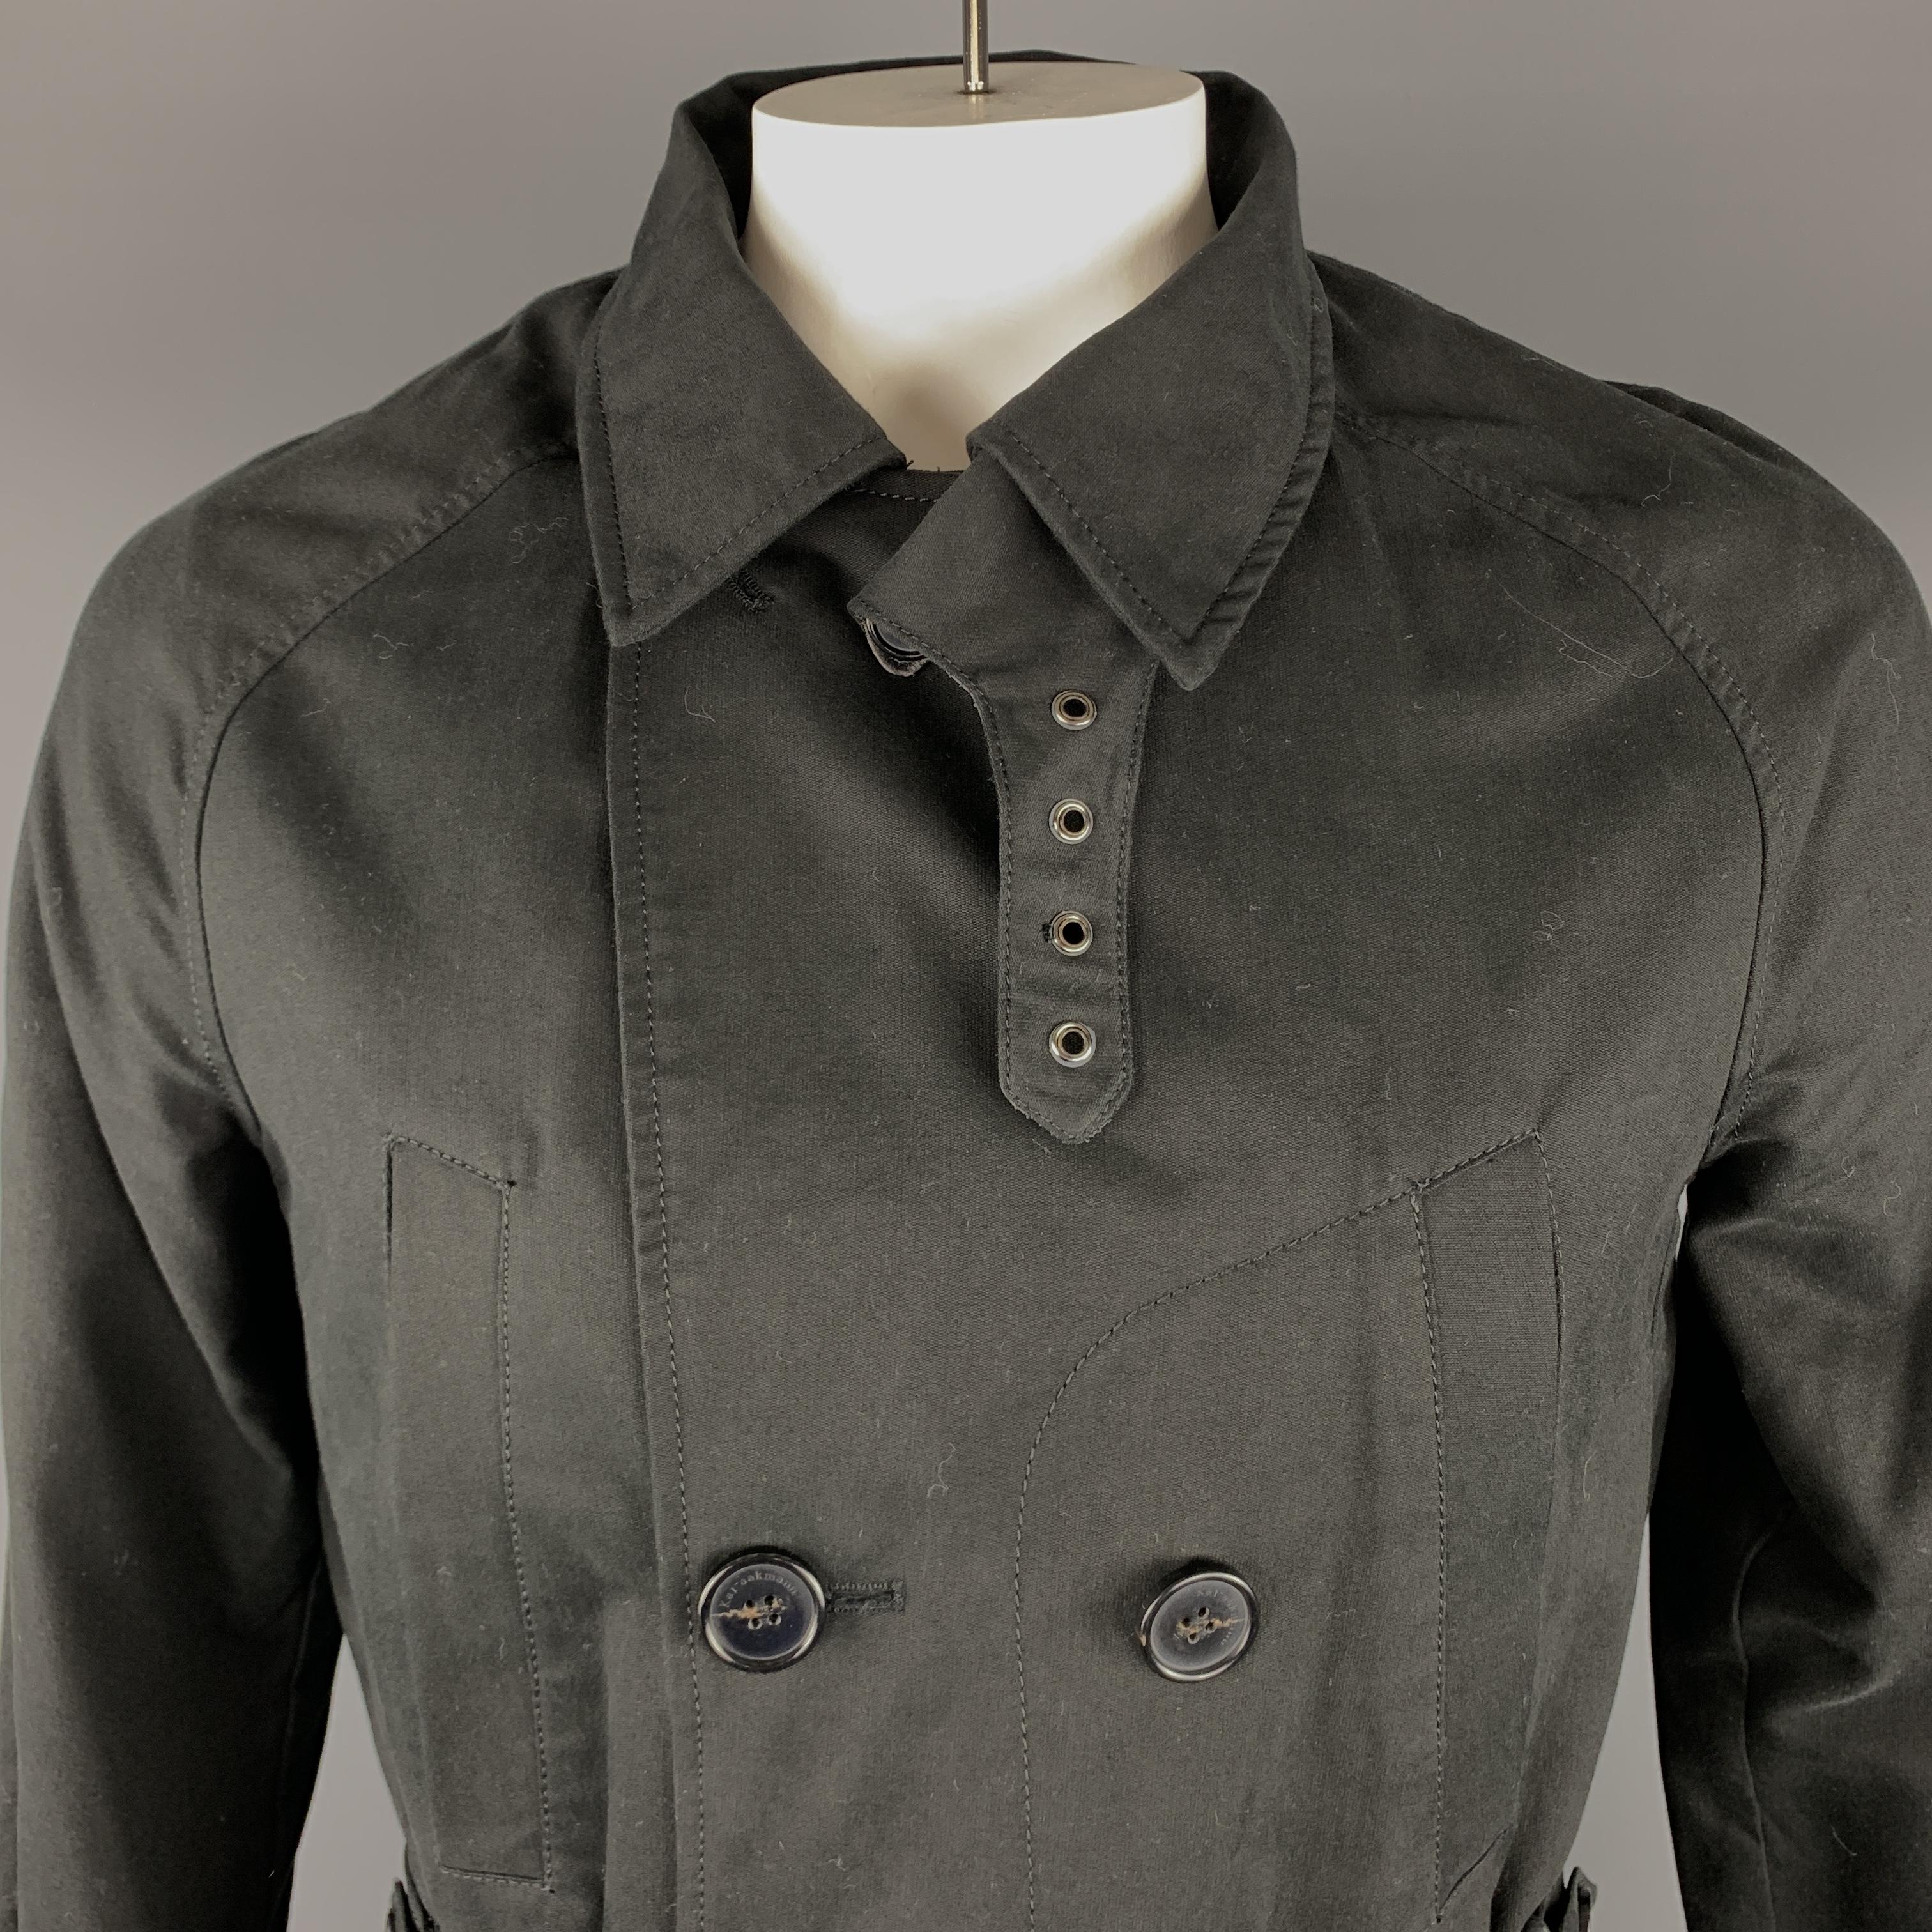 KAI AAKMANN Trench coat comes in a black tone in a solid cotton material, with a peak lapel, raglan sleeves, slit pockets, belted cuffs, double breasted, a single vent at back and a detachable lining.
 
Excellent Pre-Owned Condition.
Marked: L
